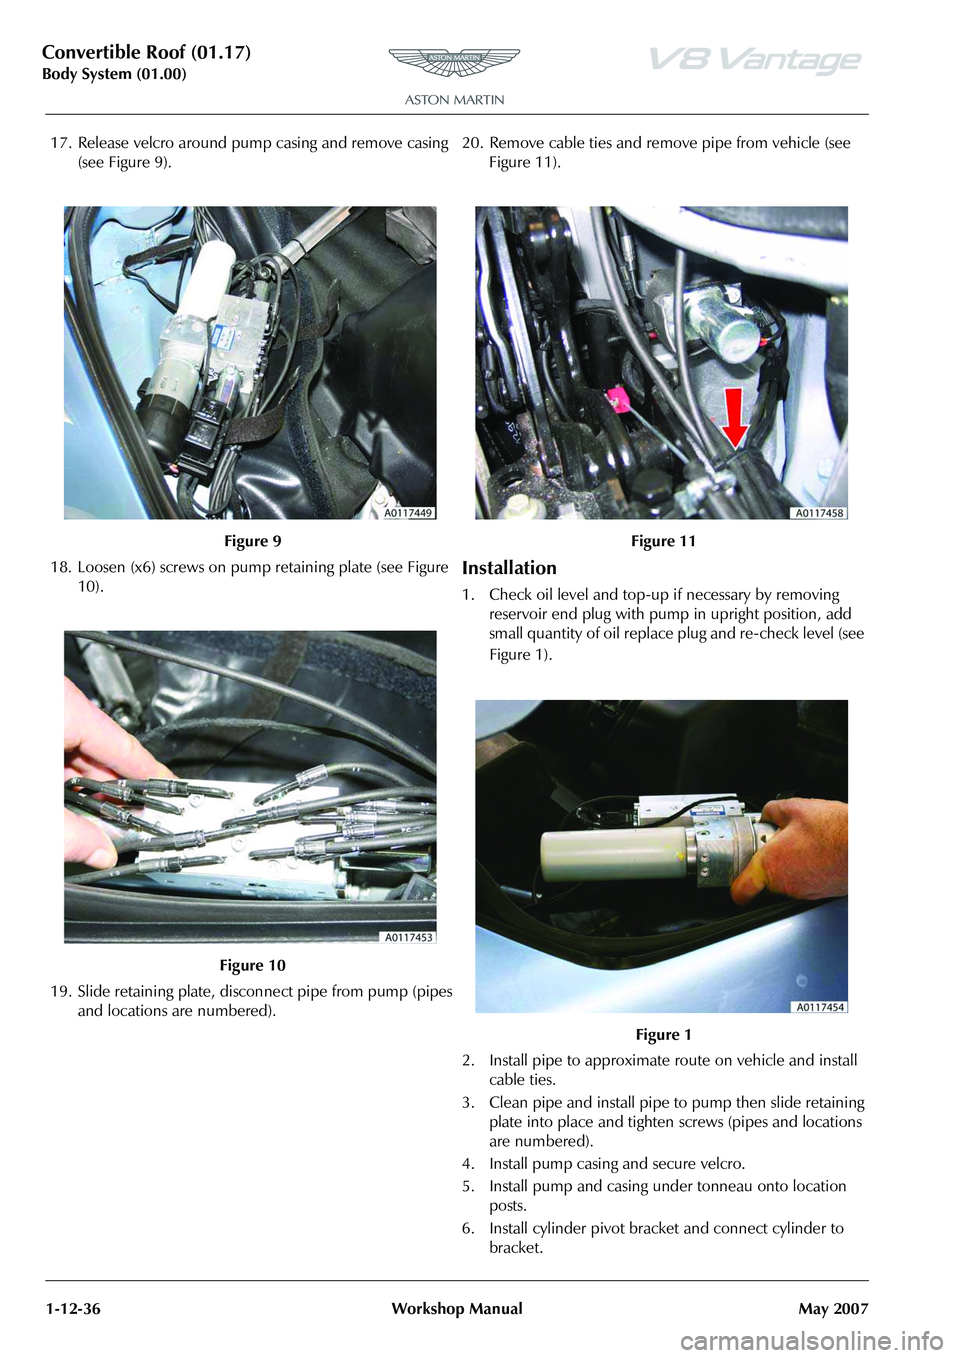 ASTON MARTIN V8 VANTAGE 2010  Workshop Manual Convertible Roof (01.17)
Body System (01.00)1-12-36 Workshop Manual May 2007
17. Release velcro around pu mp casing and remove casing 
(see Figure 9).
18. Loosen (x6) screws on pump  retaining plate (